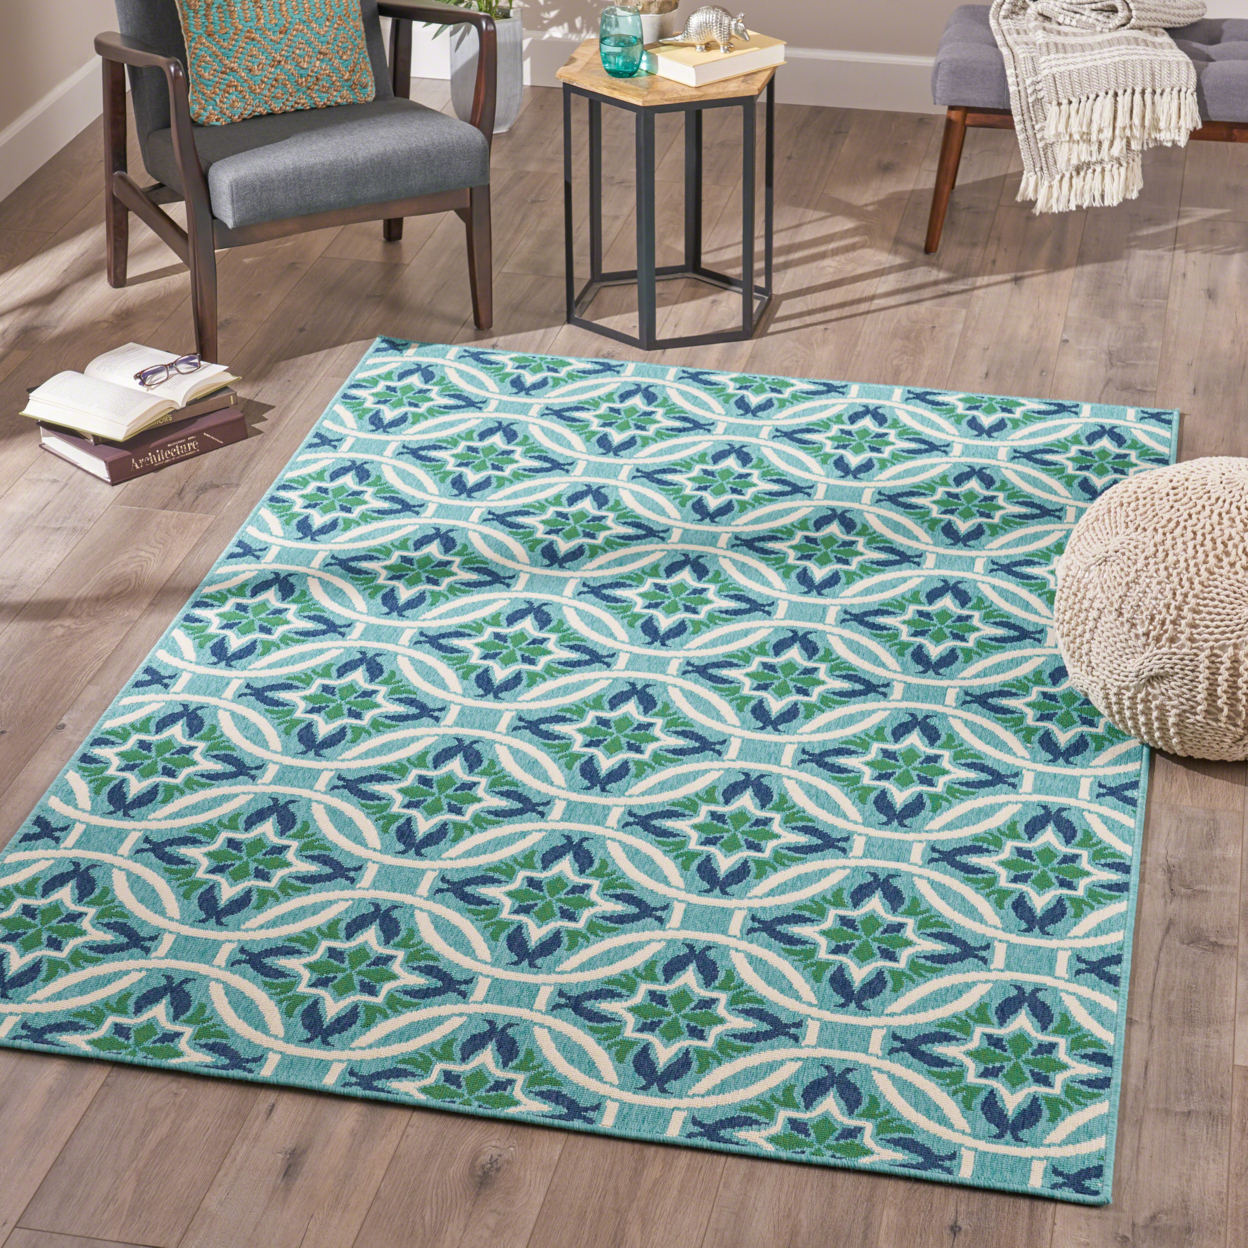 Jack Indoor Geometric Area Rug, Blue And Green - Blue + Green, 5' X 8'